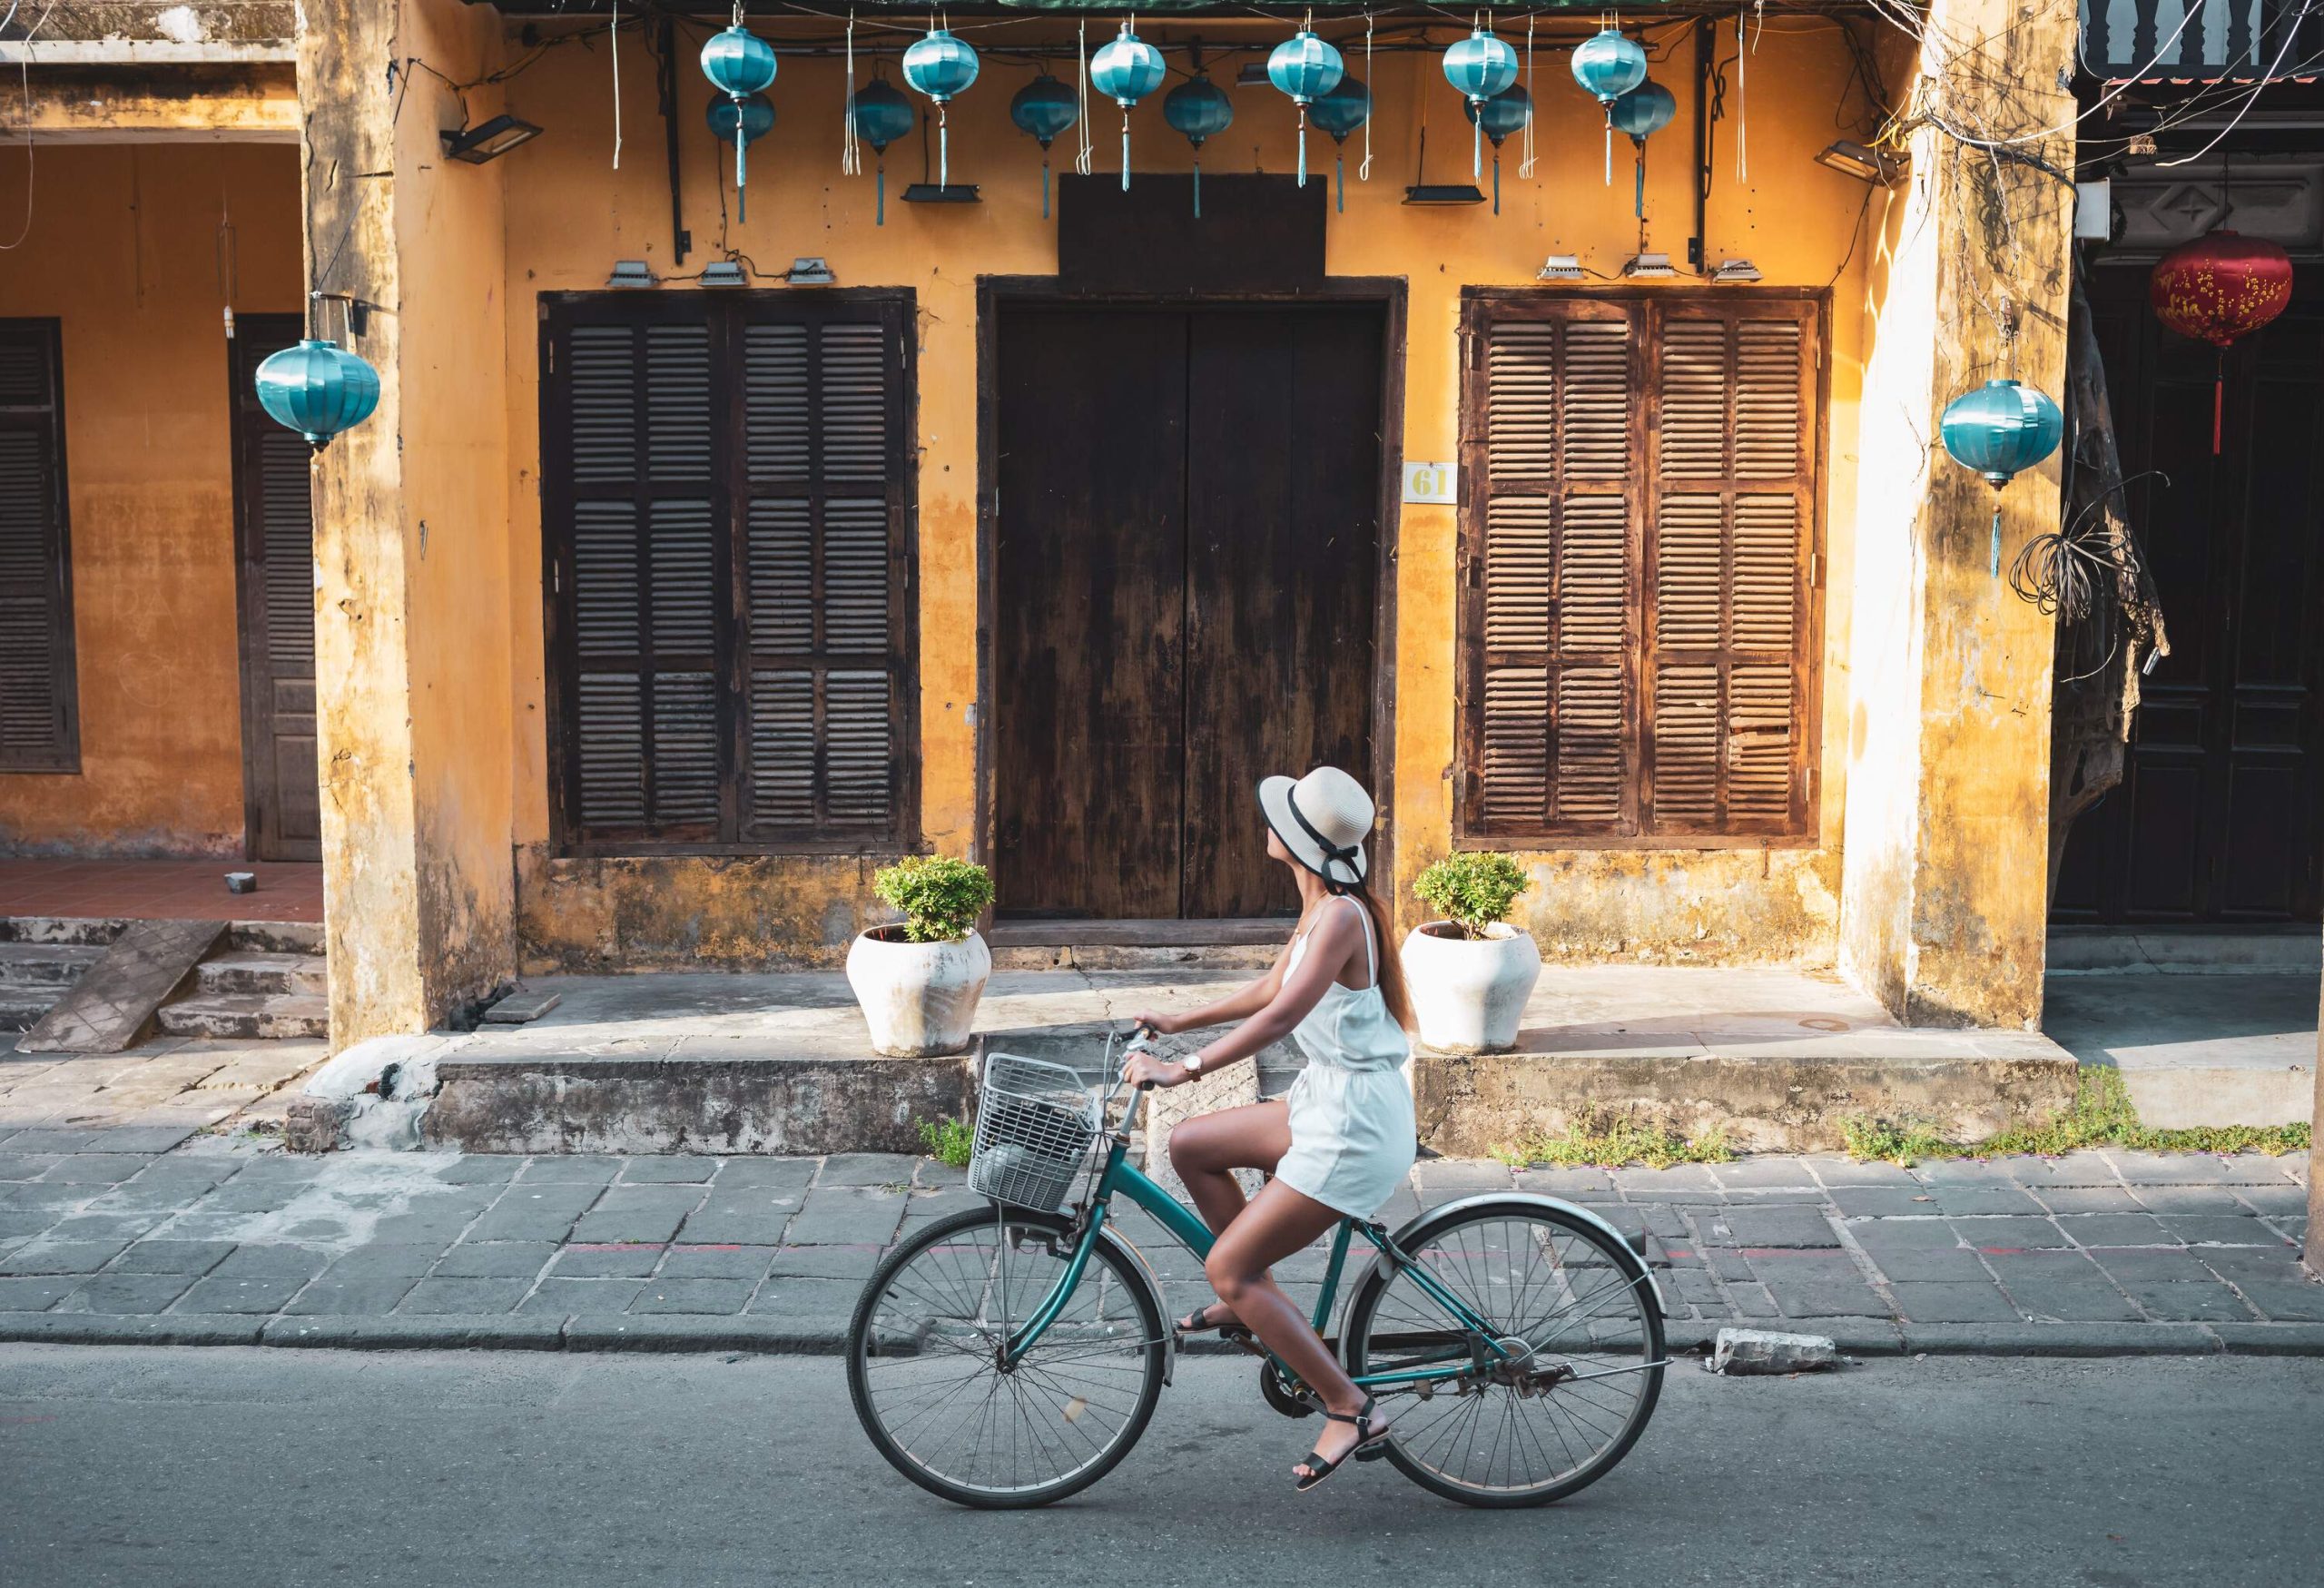 A woman tourist leisurely cycles through the charming old district, with a row of faded-paint houses in the background.